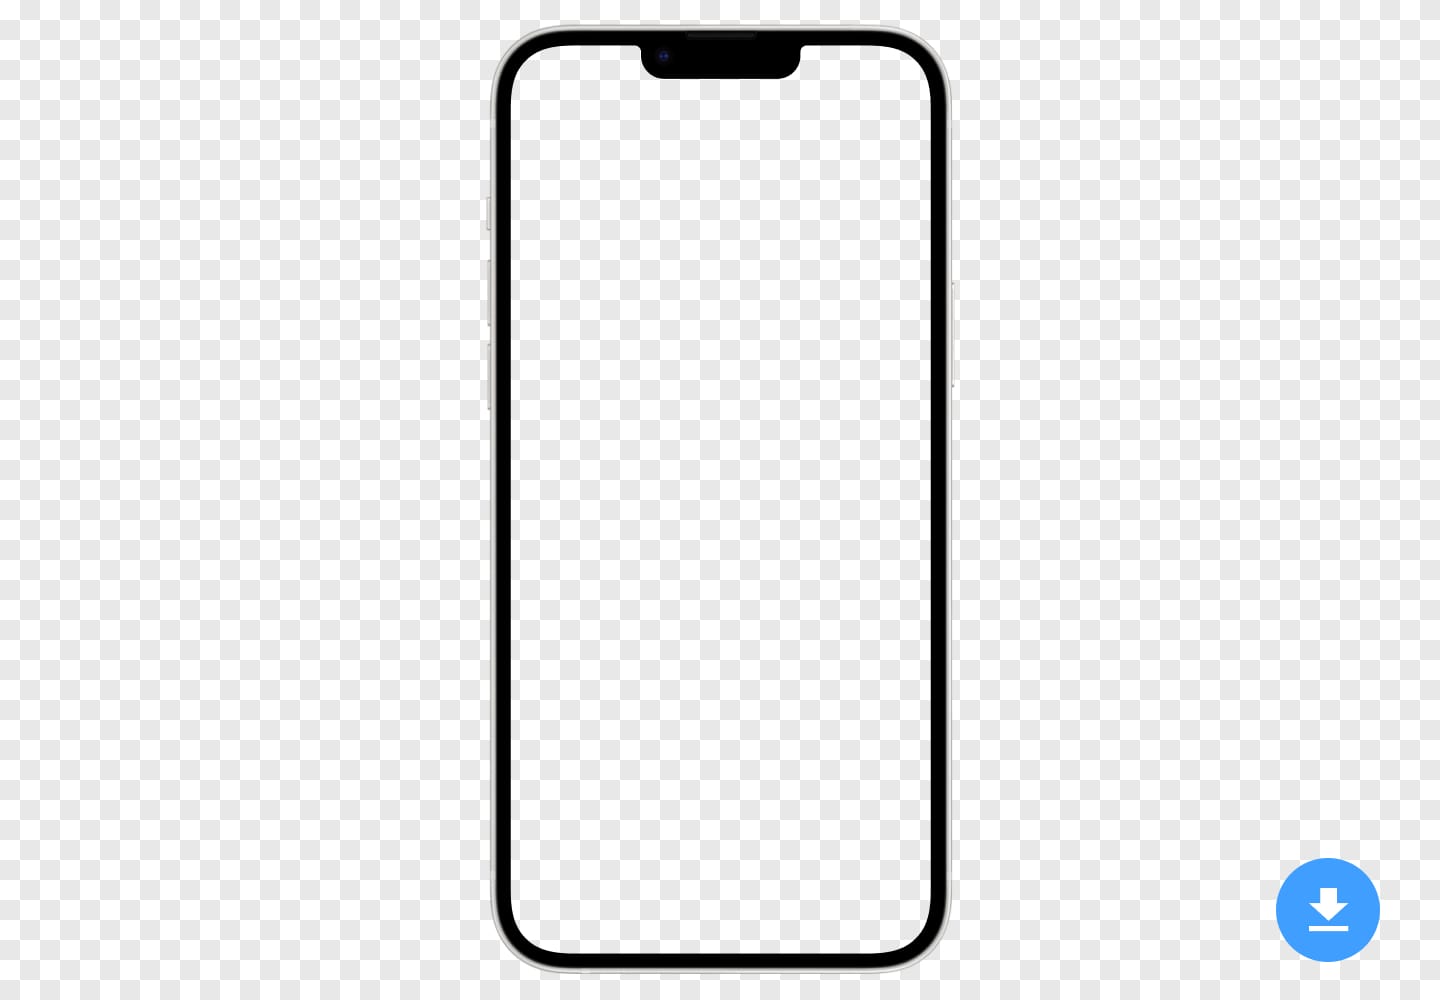 Free HD mockup of Apple iPhone 14 MAX (2022) in PNG and PSD image format with transparent background